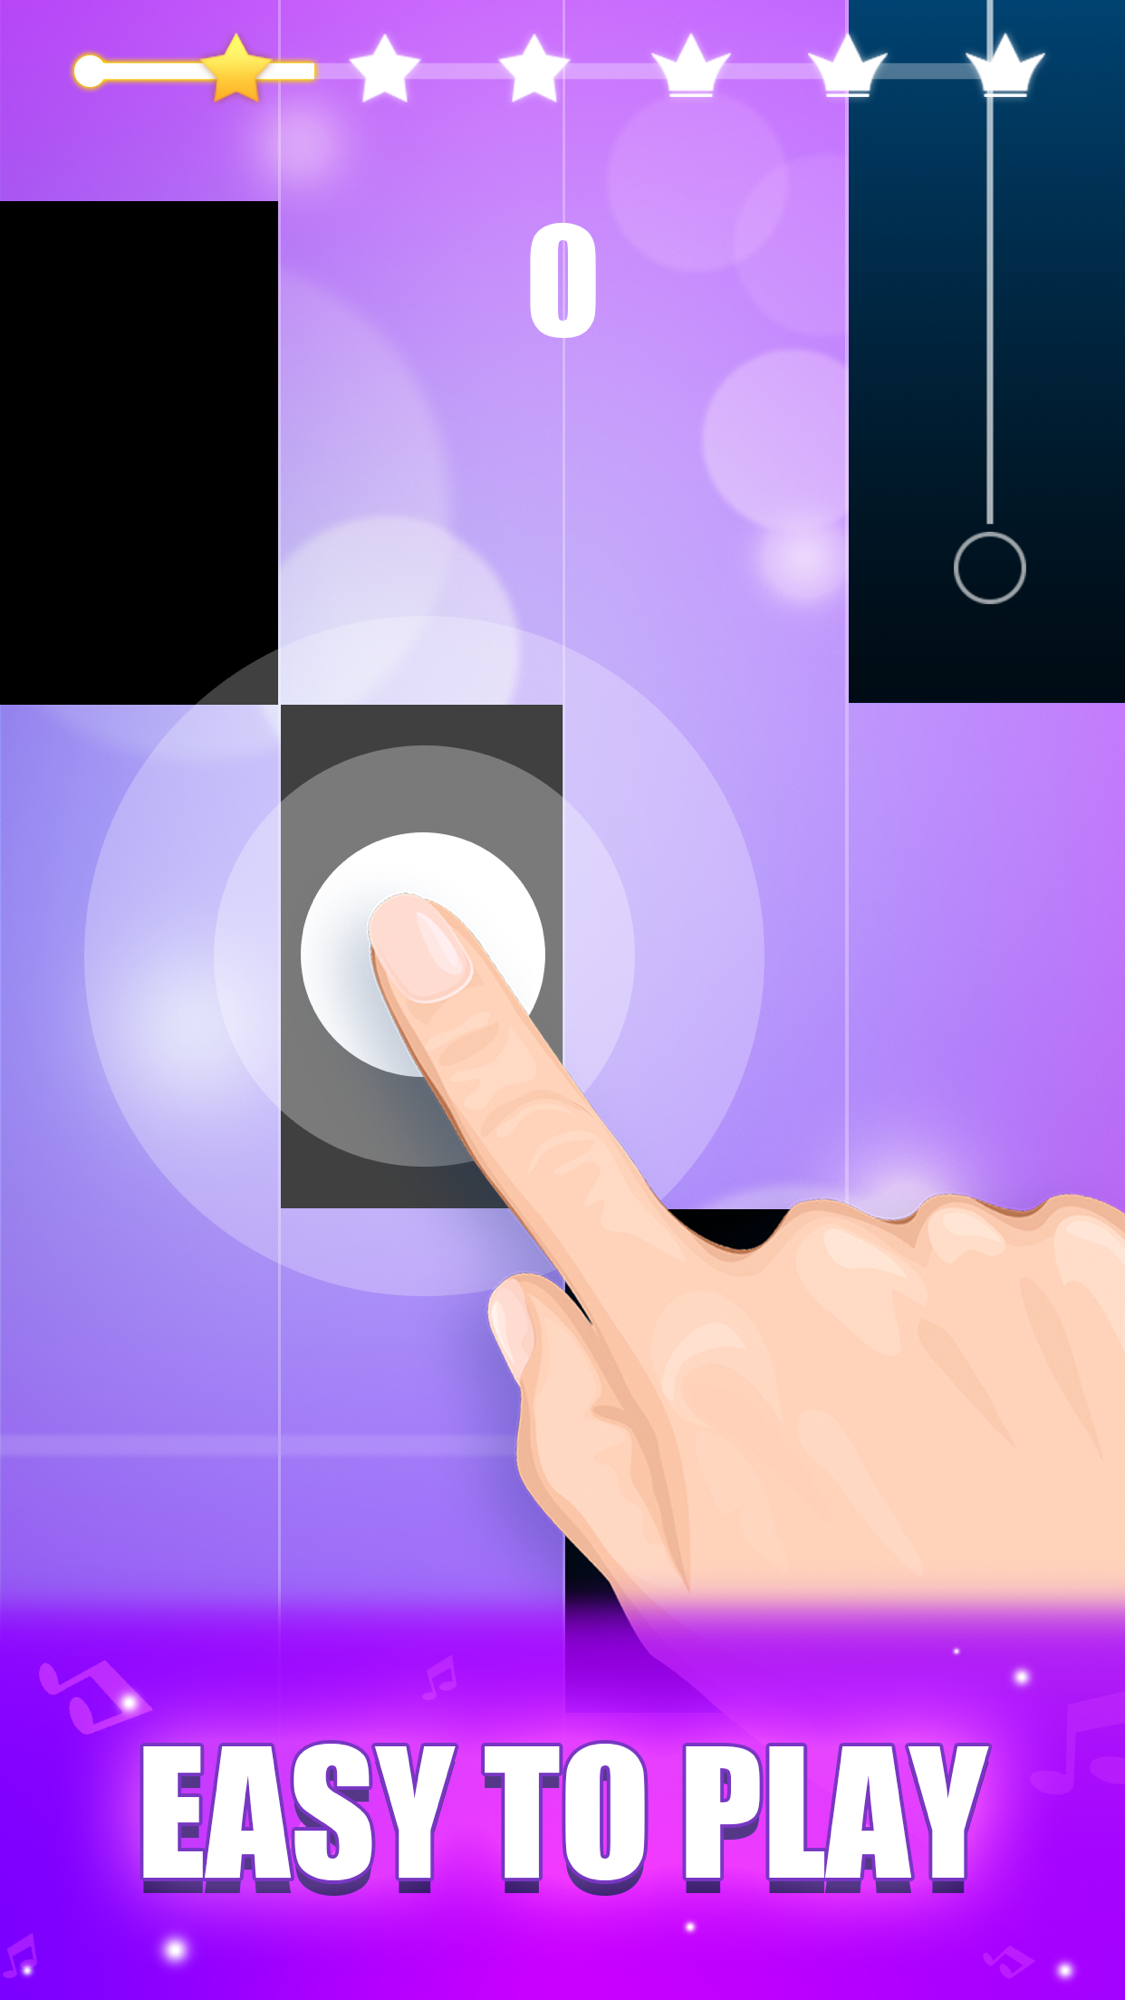 Magic Piano Tiles 4Pop Songs  Featured Image for Version 